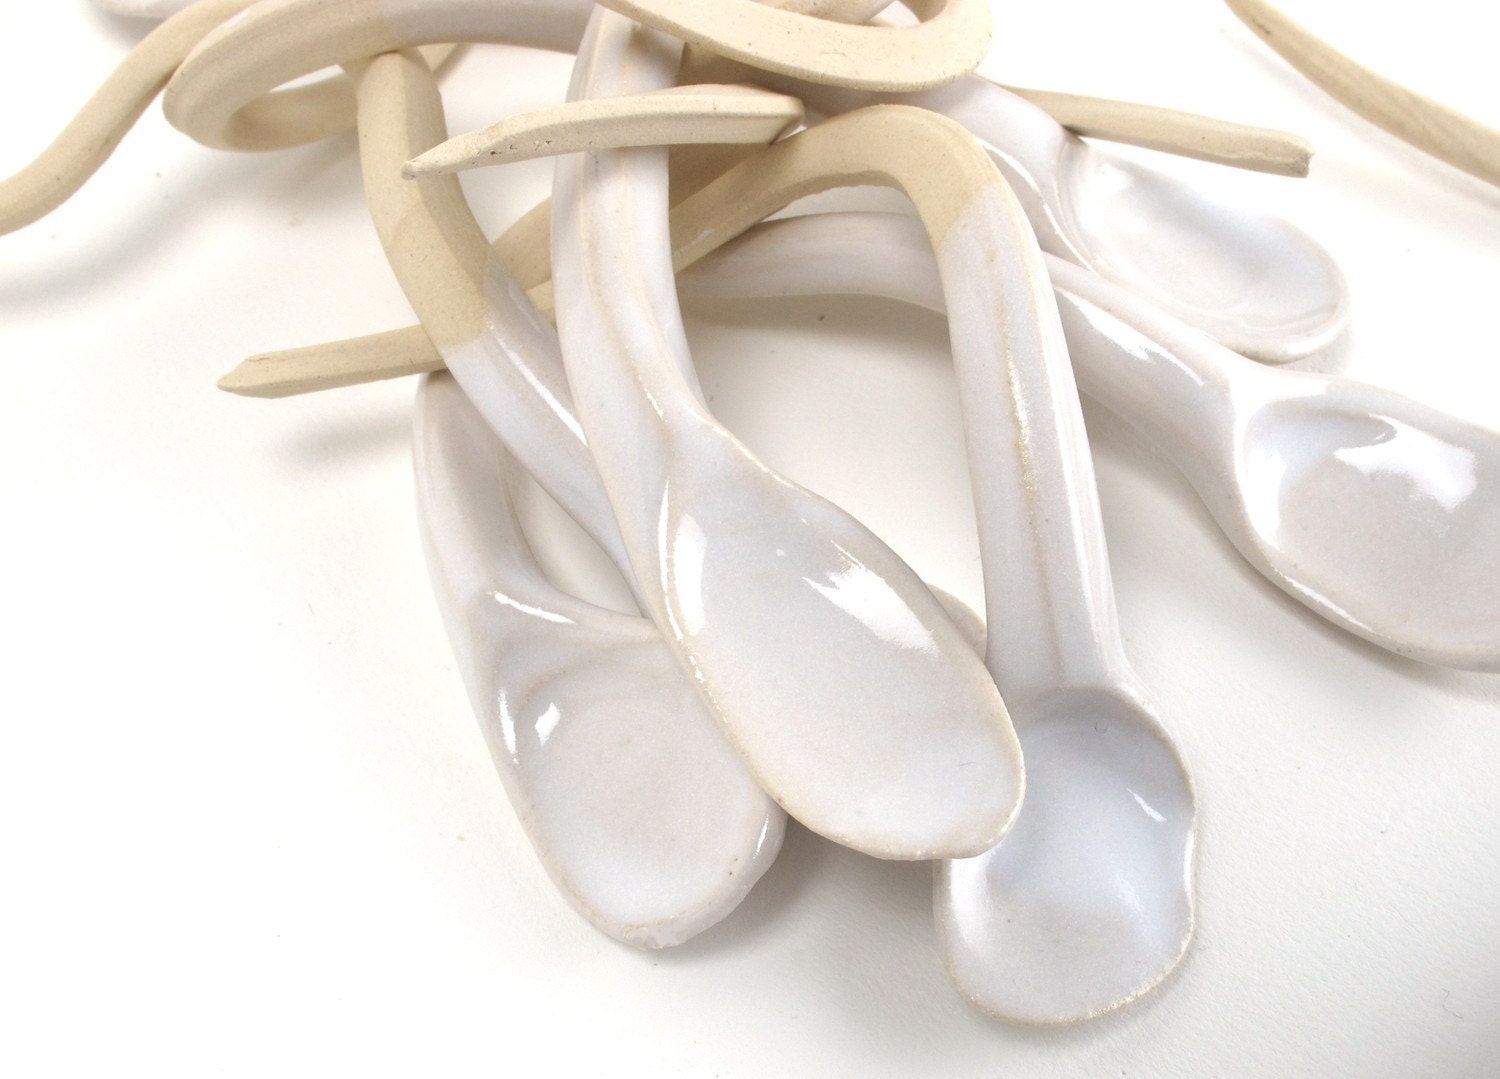 Tingletangle spoons (set of 8) sound beautiful in your cup of coffee